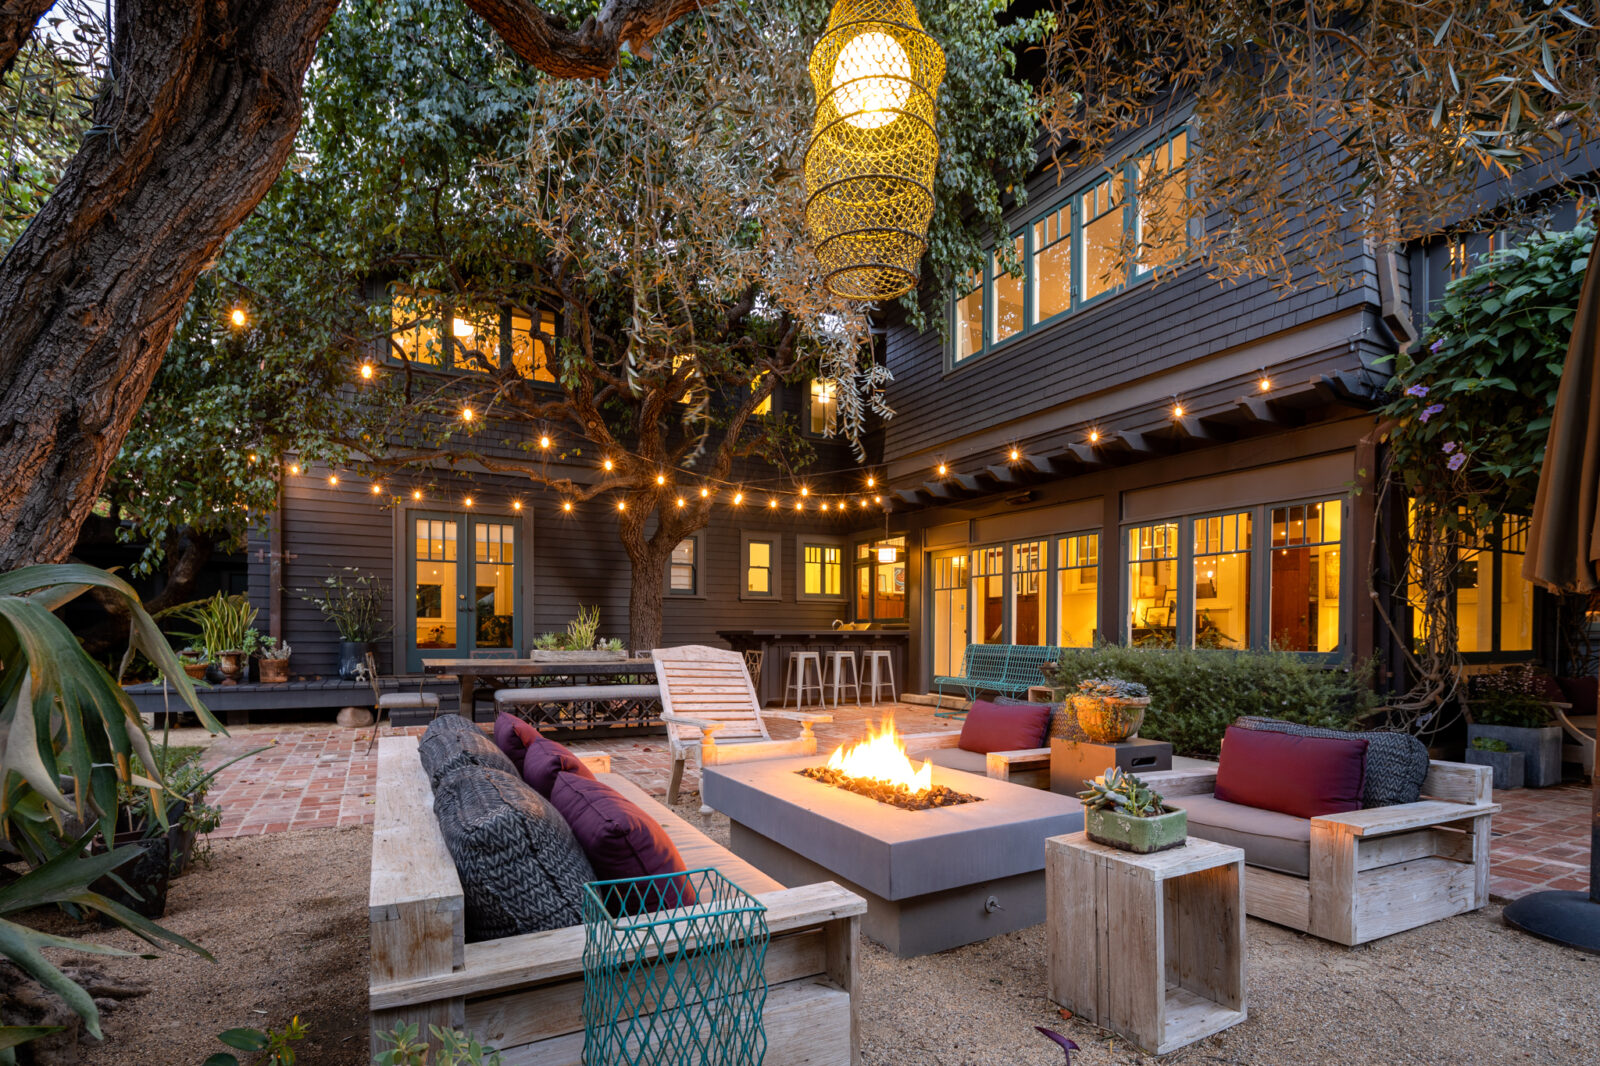 streaming lights cross over a fire pit in the backyard of a Santa Monica Craftsman-style home at 405 Palisades Ave